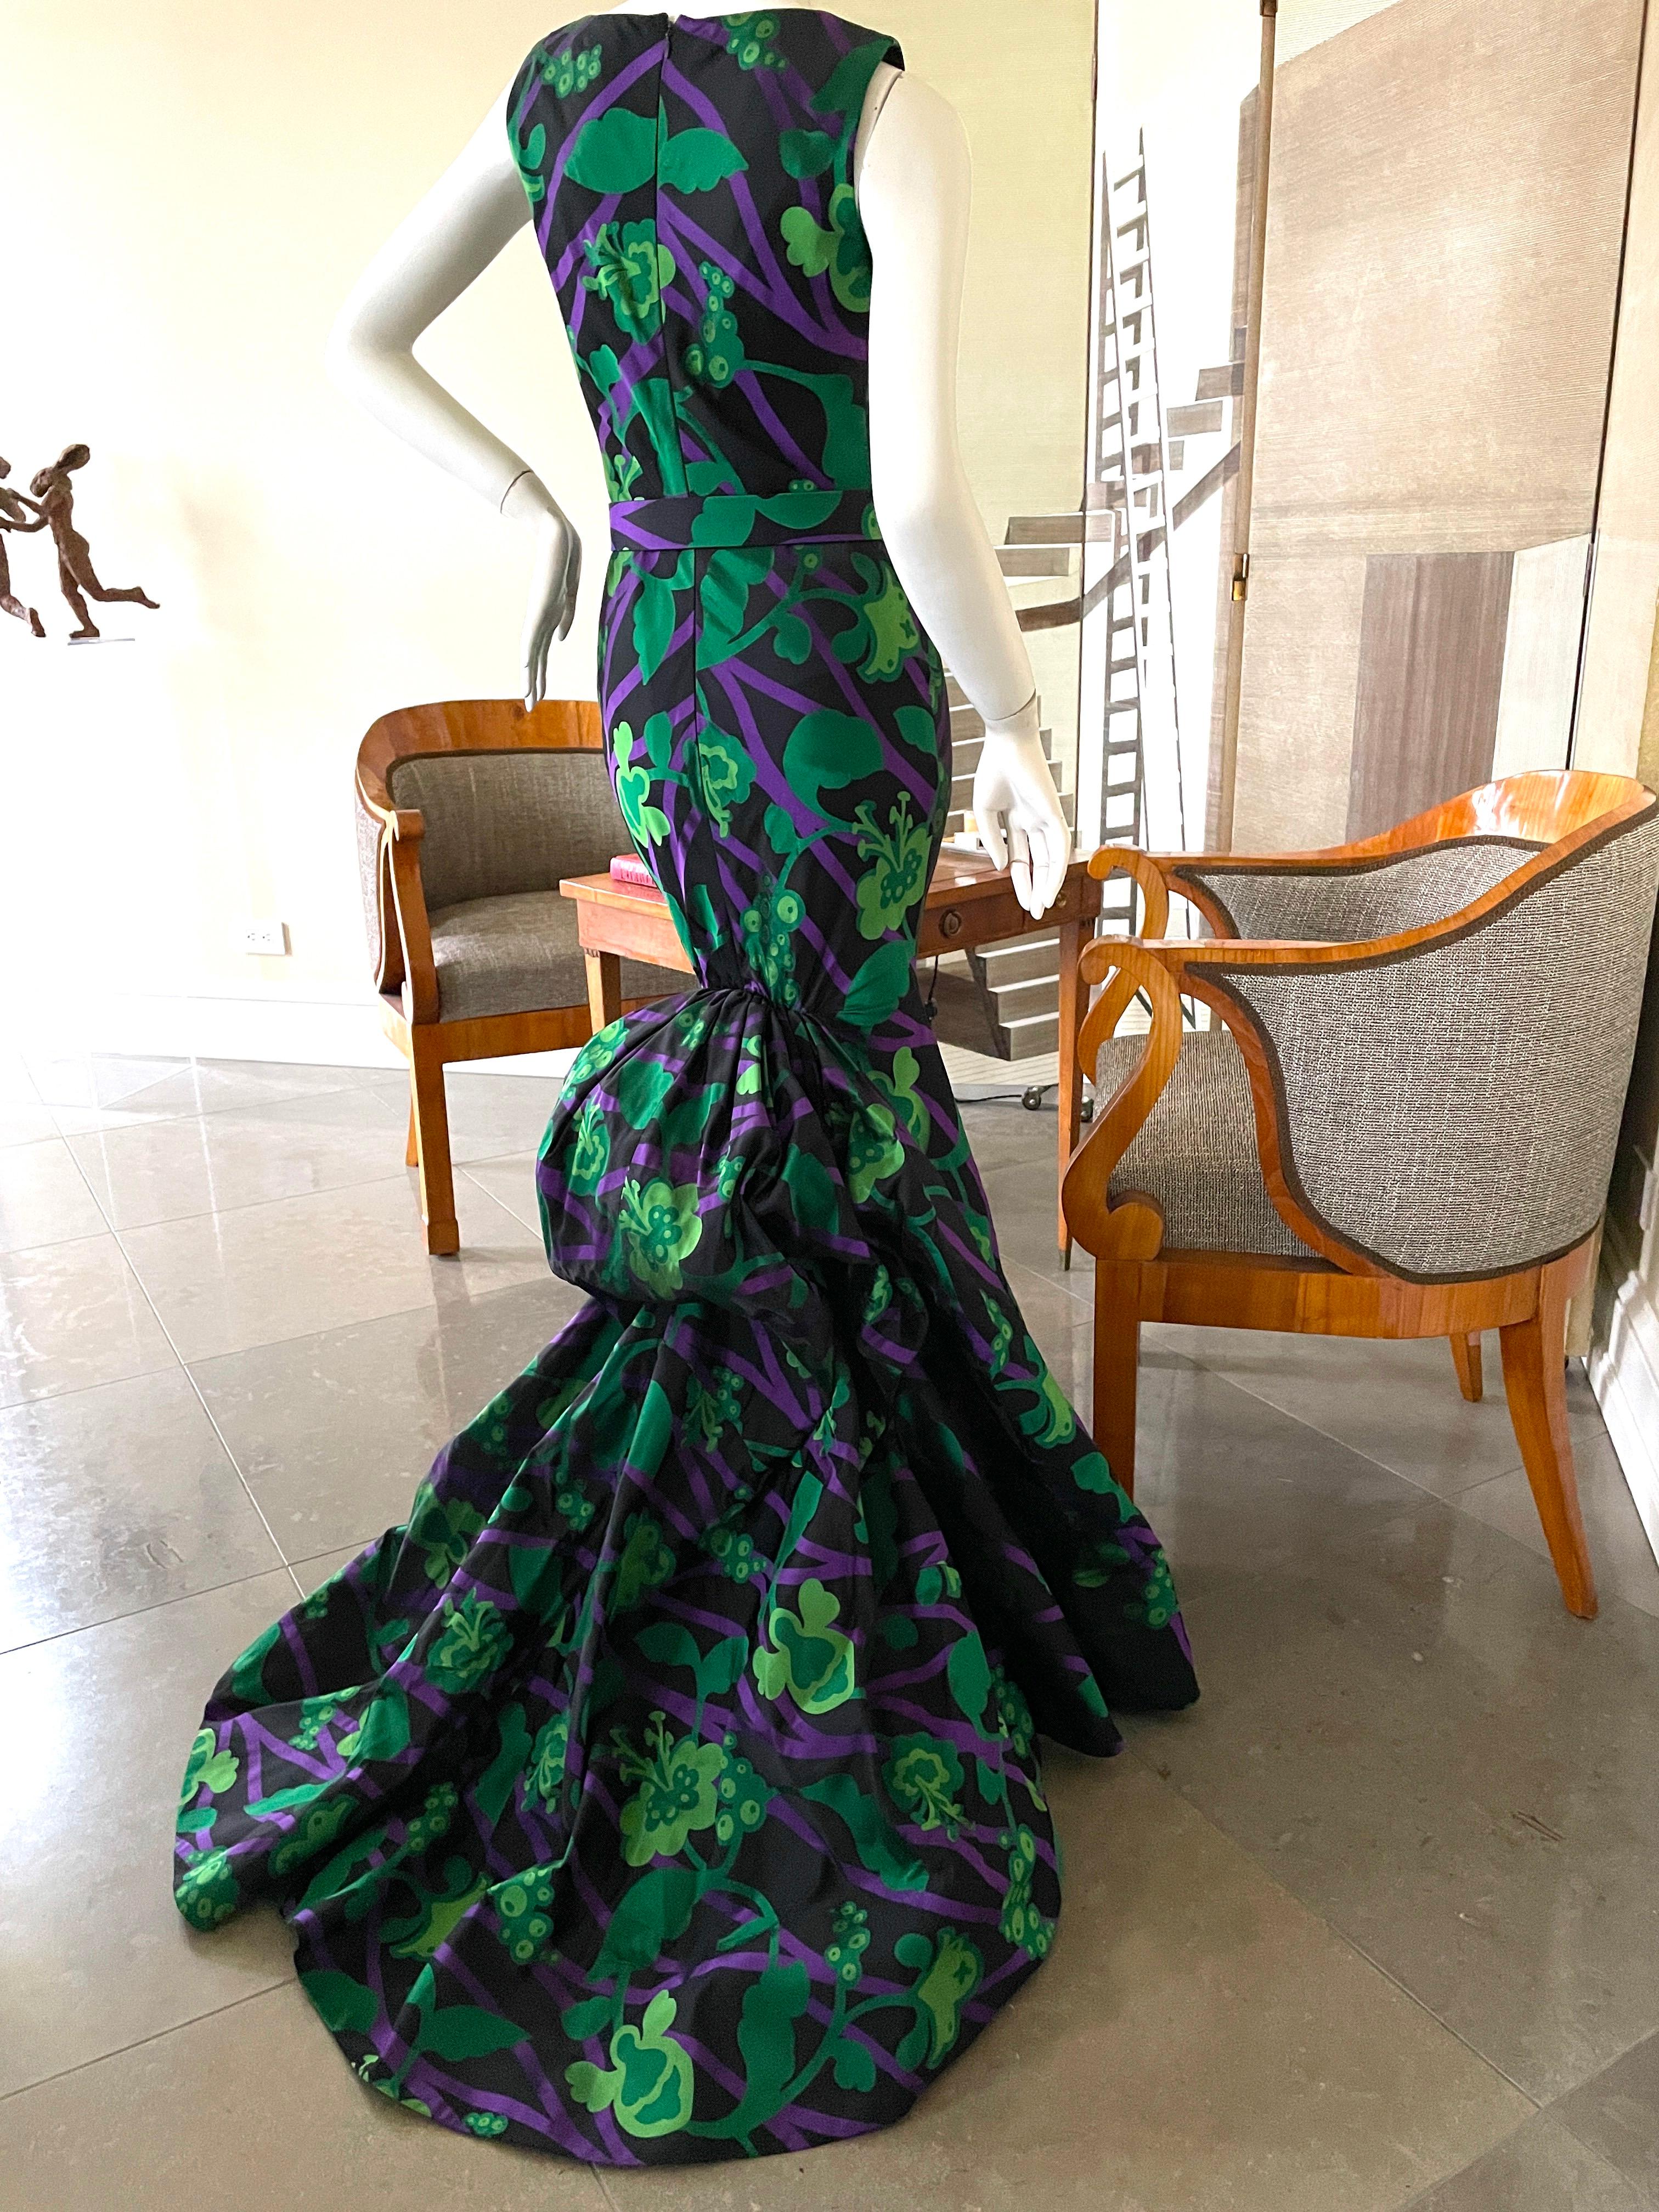 Oscar de la Renta Vintage Floral Mermaid Train Evening Dress with Belt .
  Stunning. Please use the zoom feature to see all the remarkable details.
 Size 2
Bust 35